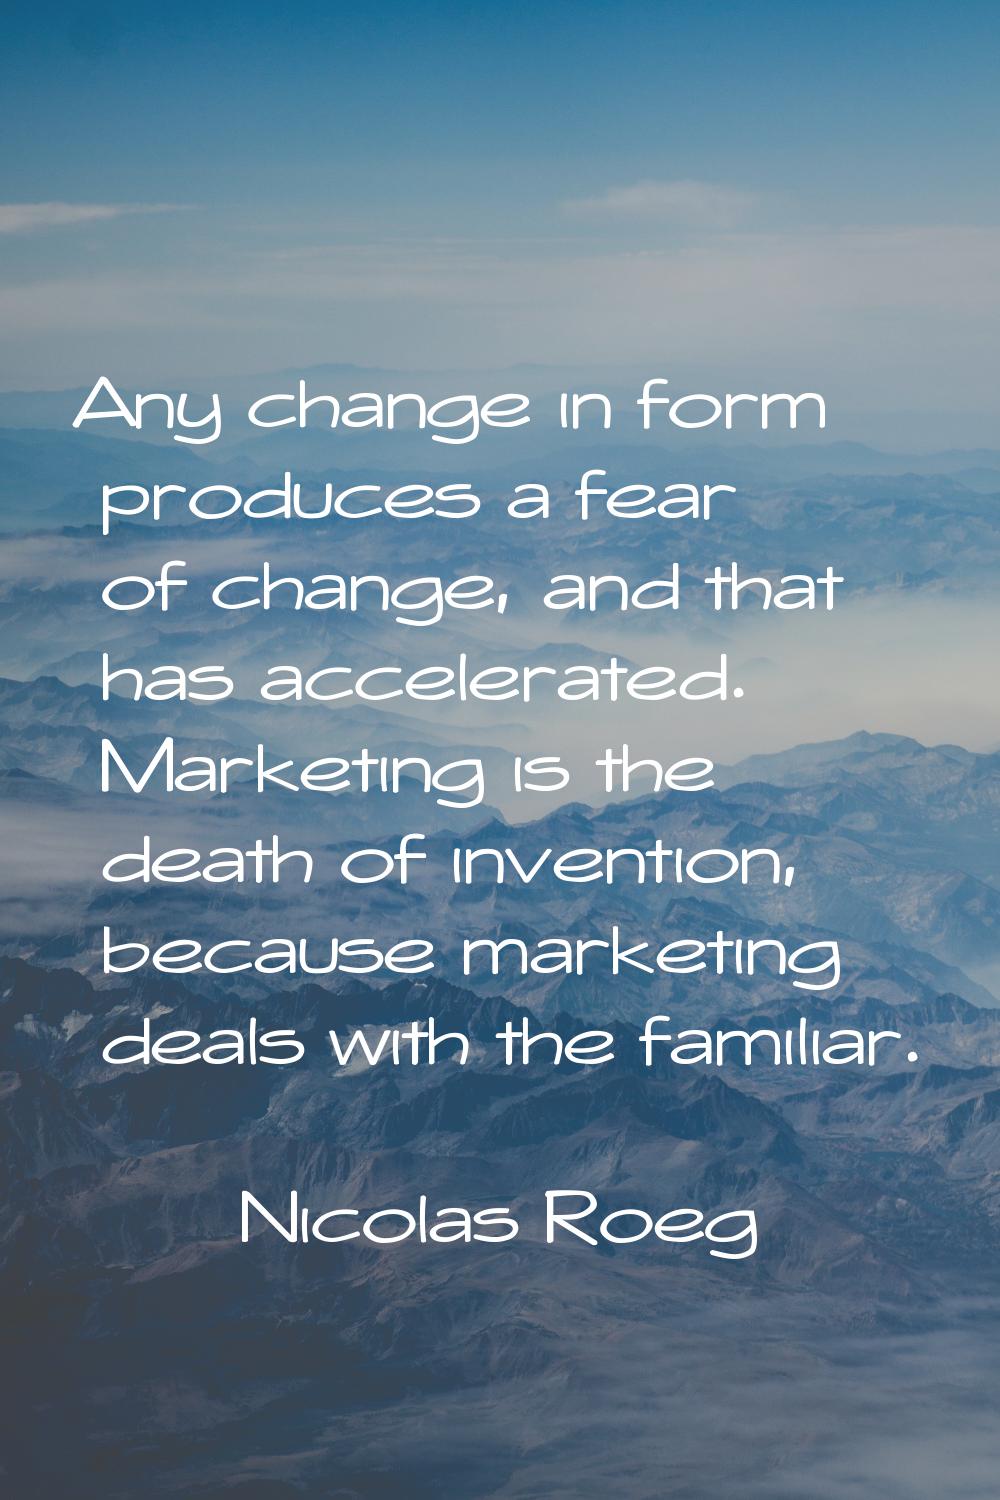 Any change in form produces a fear of change, and that has accelerated. Marketing is the death of i